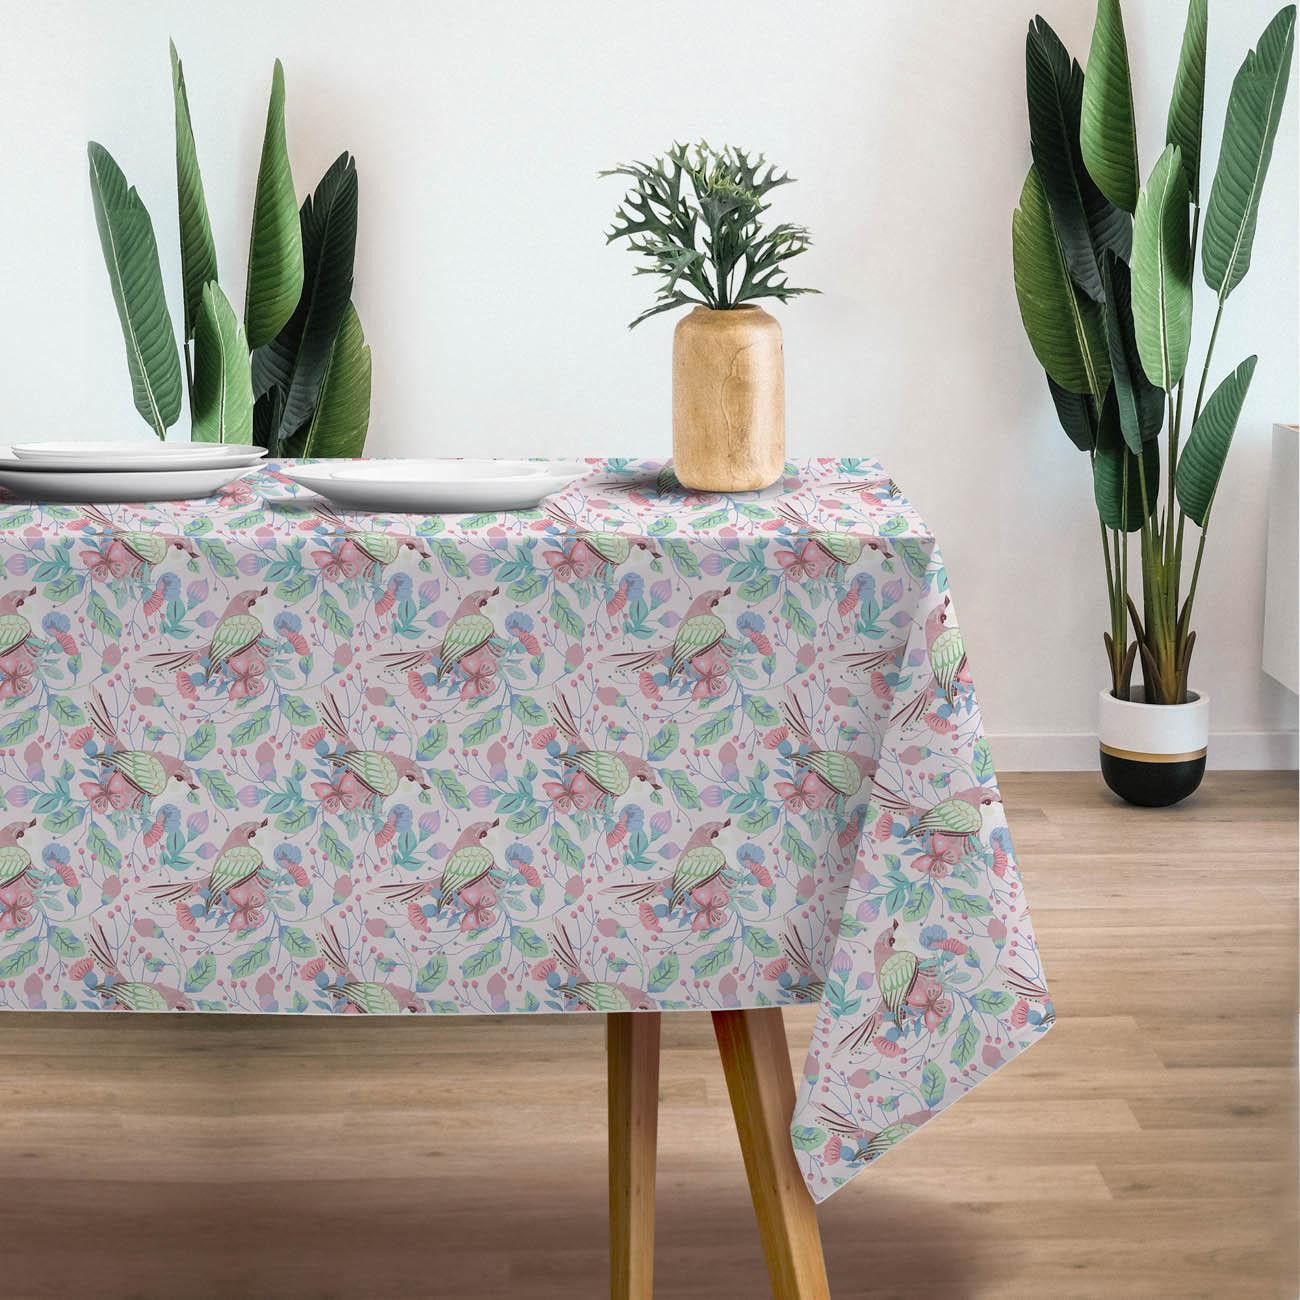 SPRING MELODY pat. 5 - Woven Fabric for tablecloths